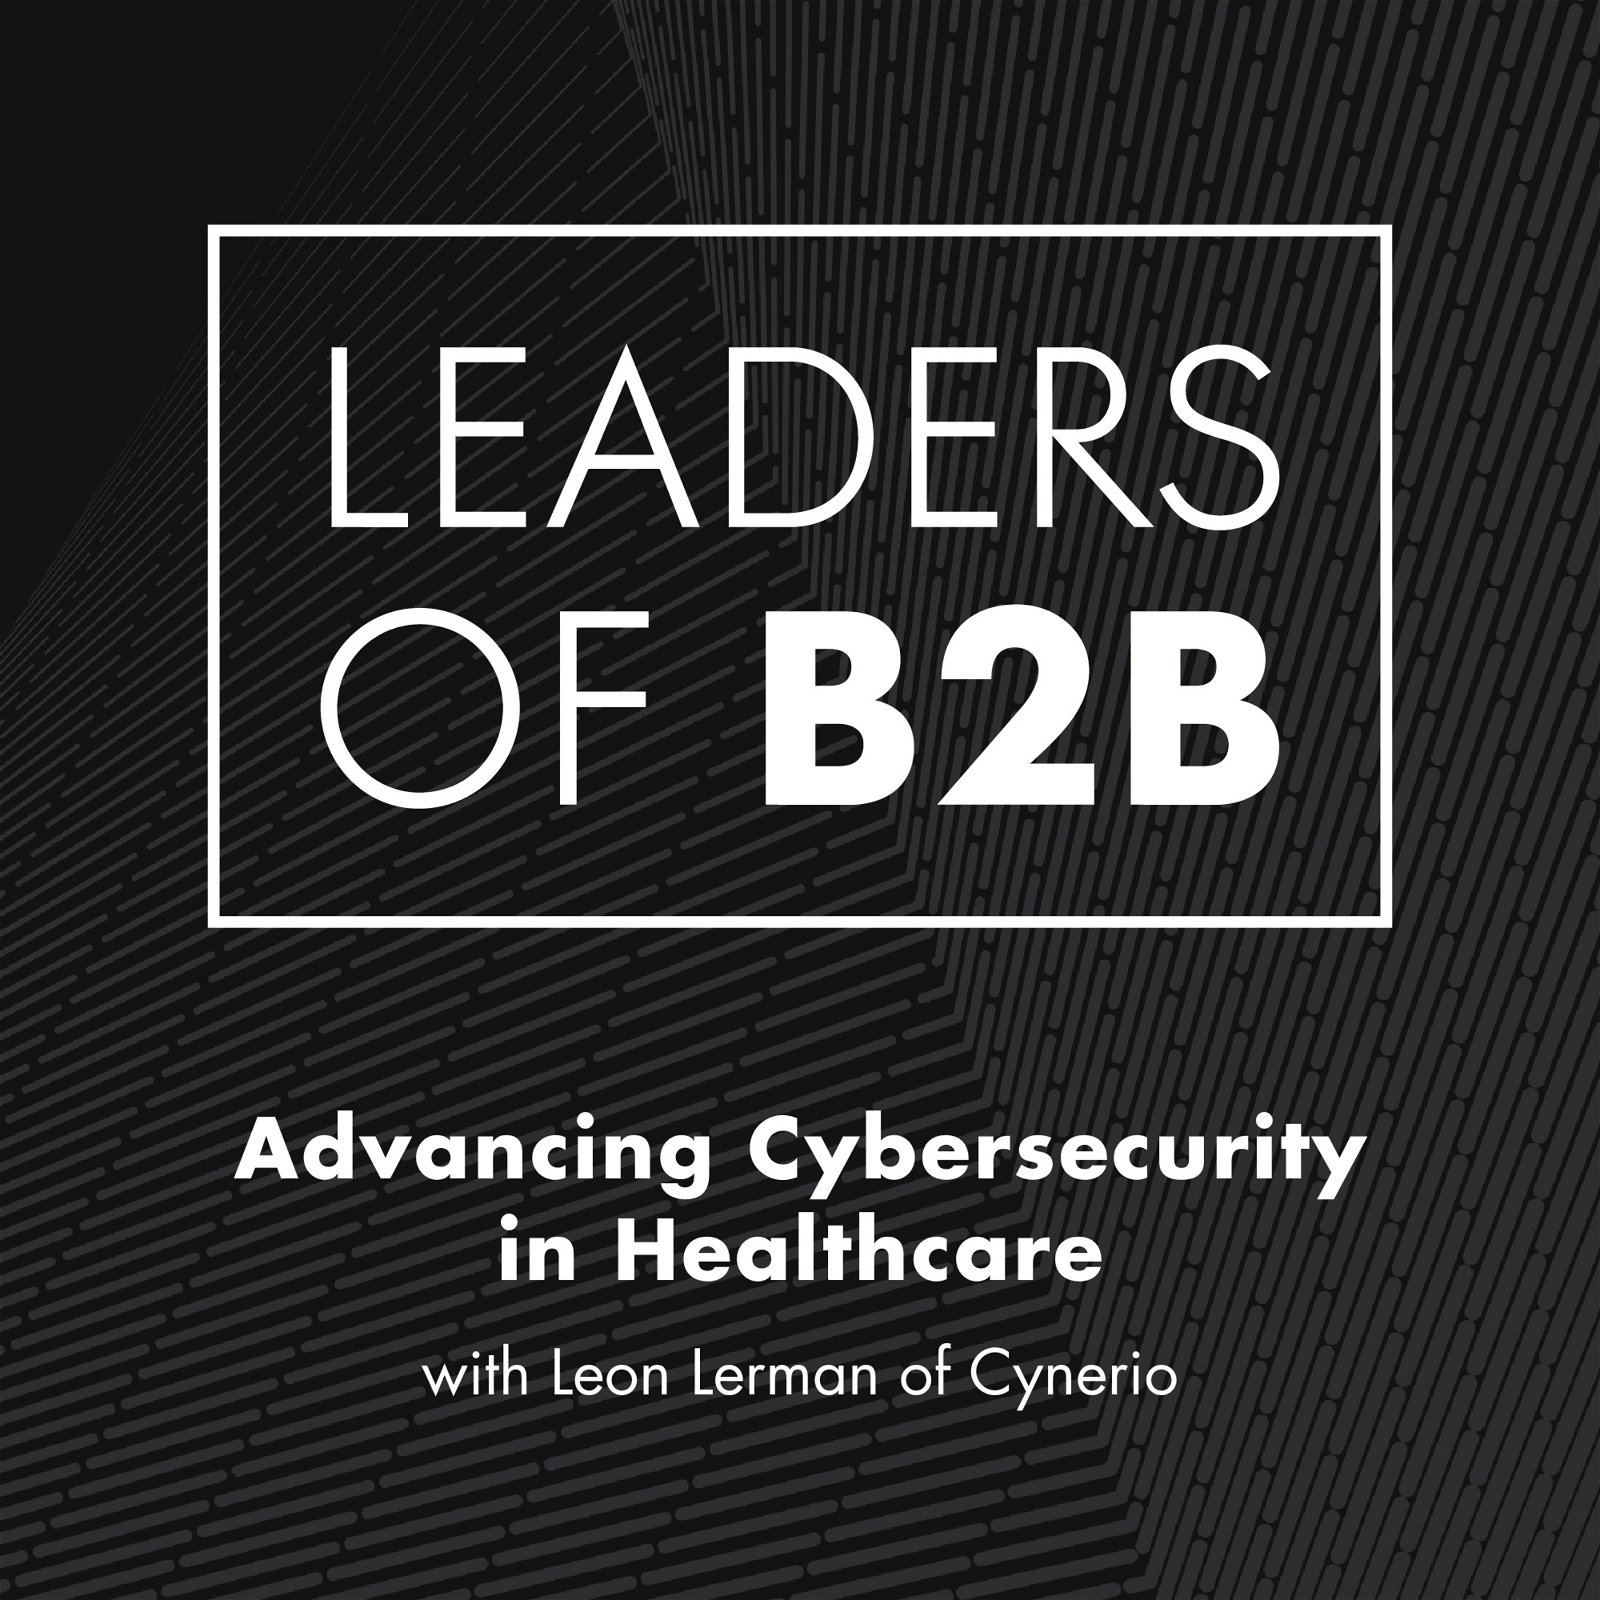 Advancing Cybersecurity in Healthcare with Leon Lerman of Cynerio